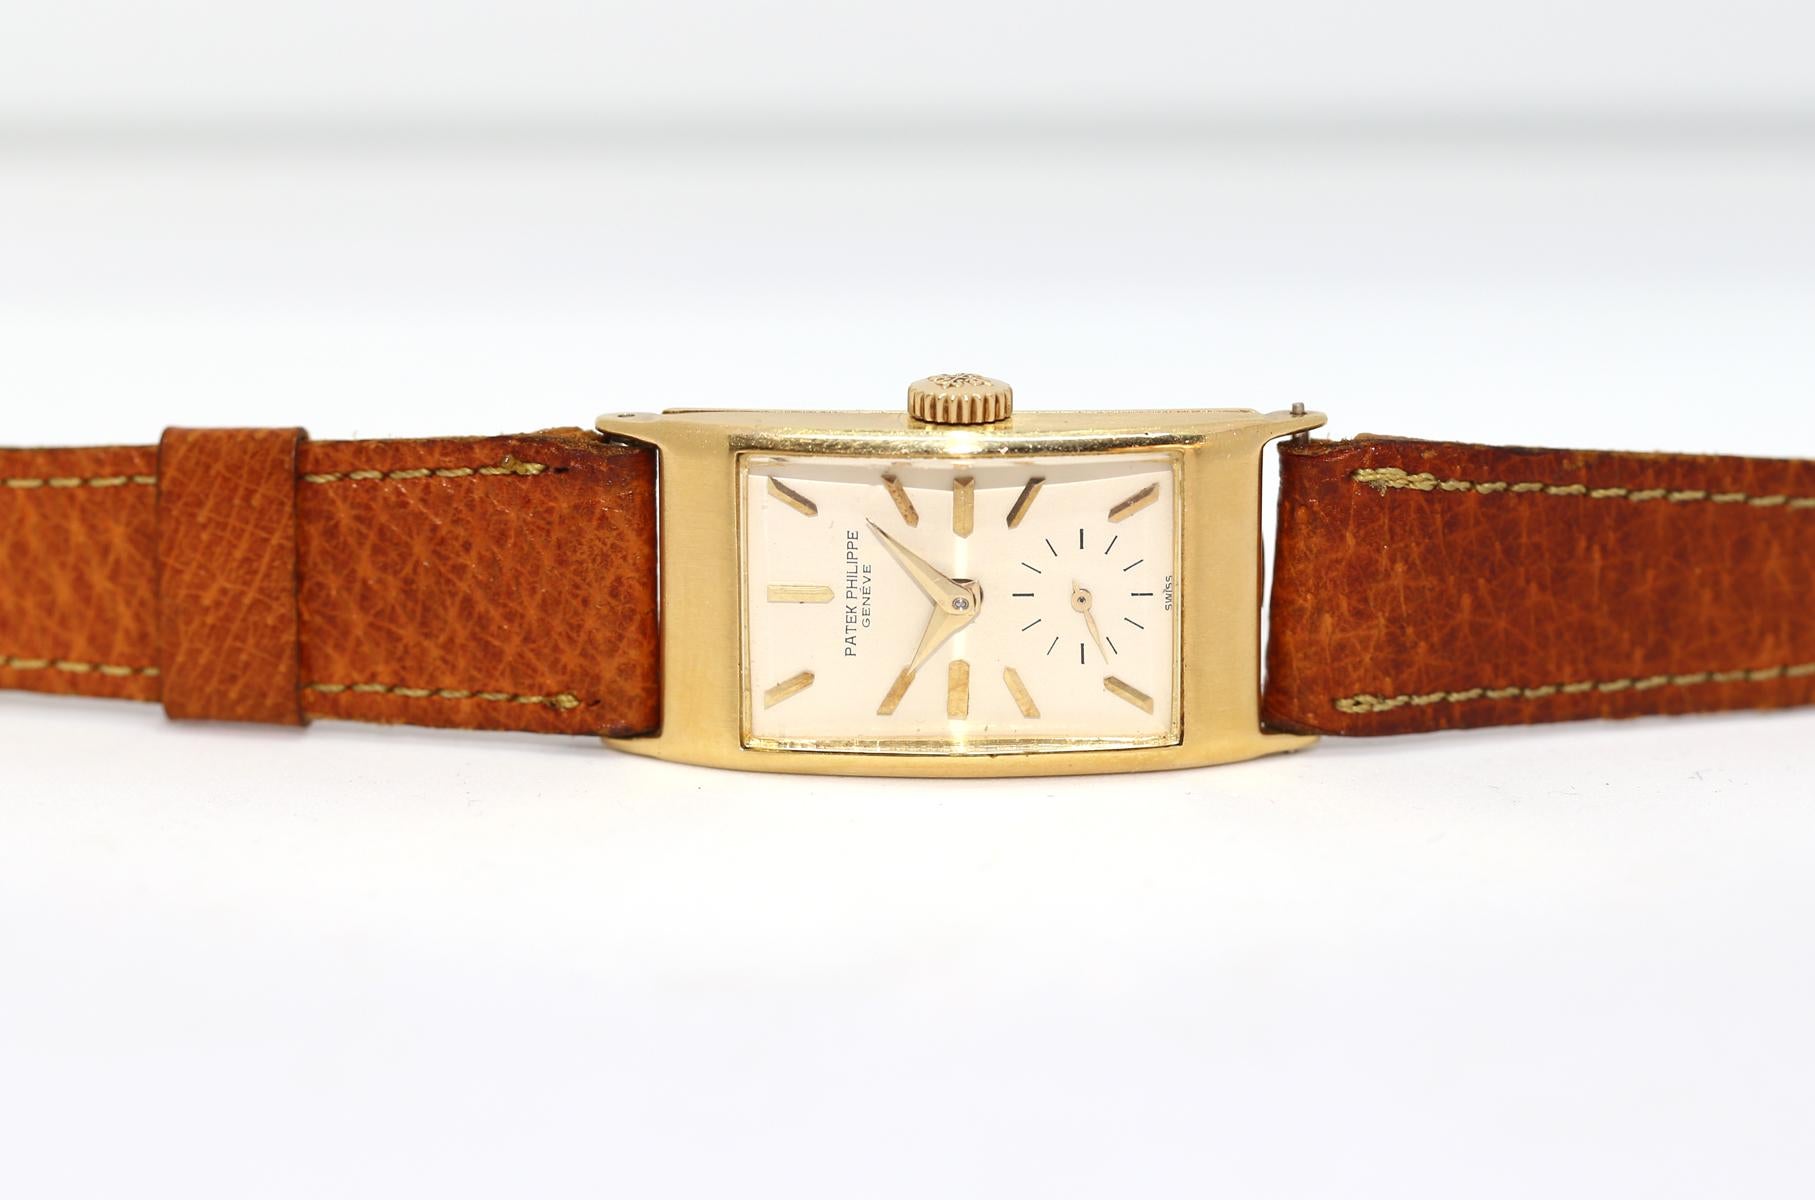 Patek Philippe Rectangular Curved Glass Ref#1593 Wristwatch in it’s original box. 

The exquisite reference 1593, also referred to by collectors as the “The Hour Glass”, was launched in 1944 and remained in production for over 20 years. Most watches